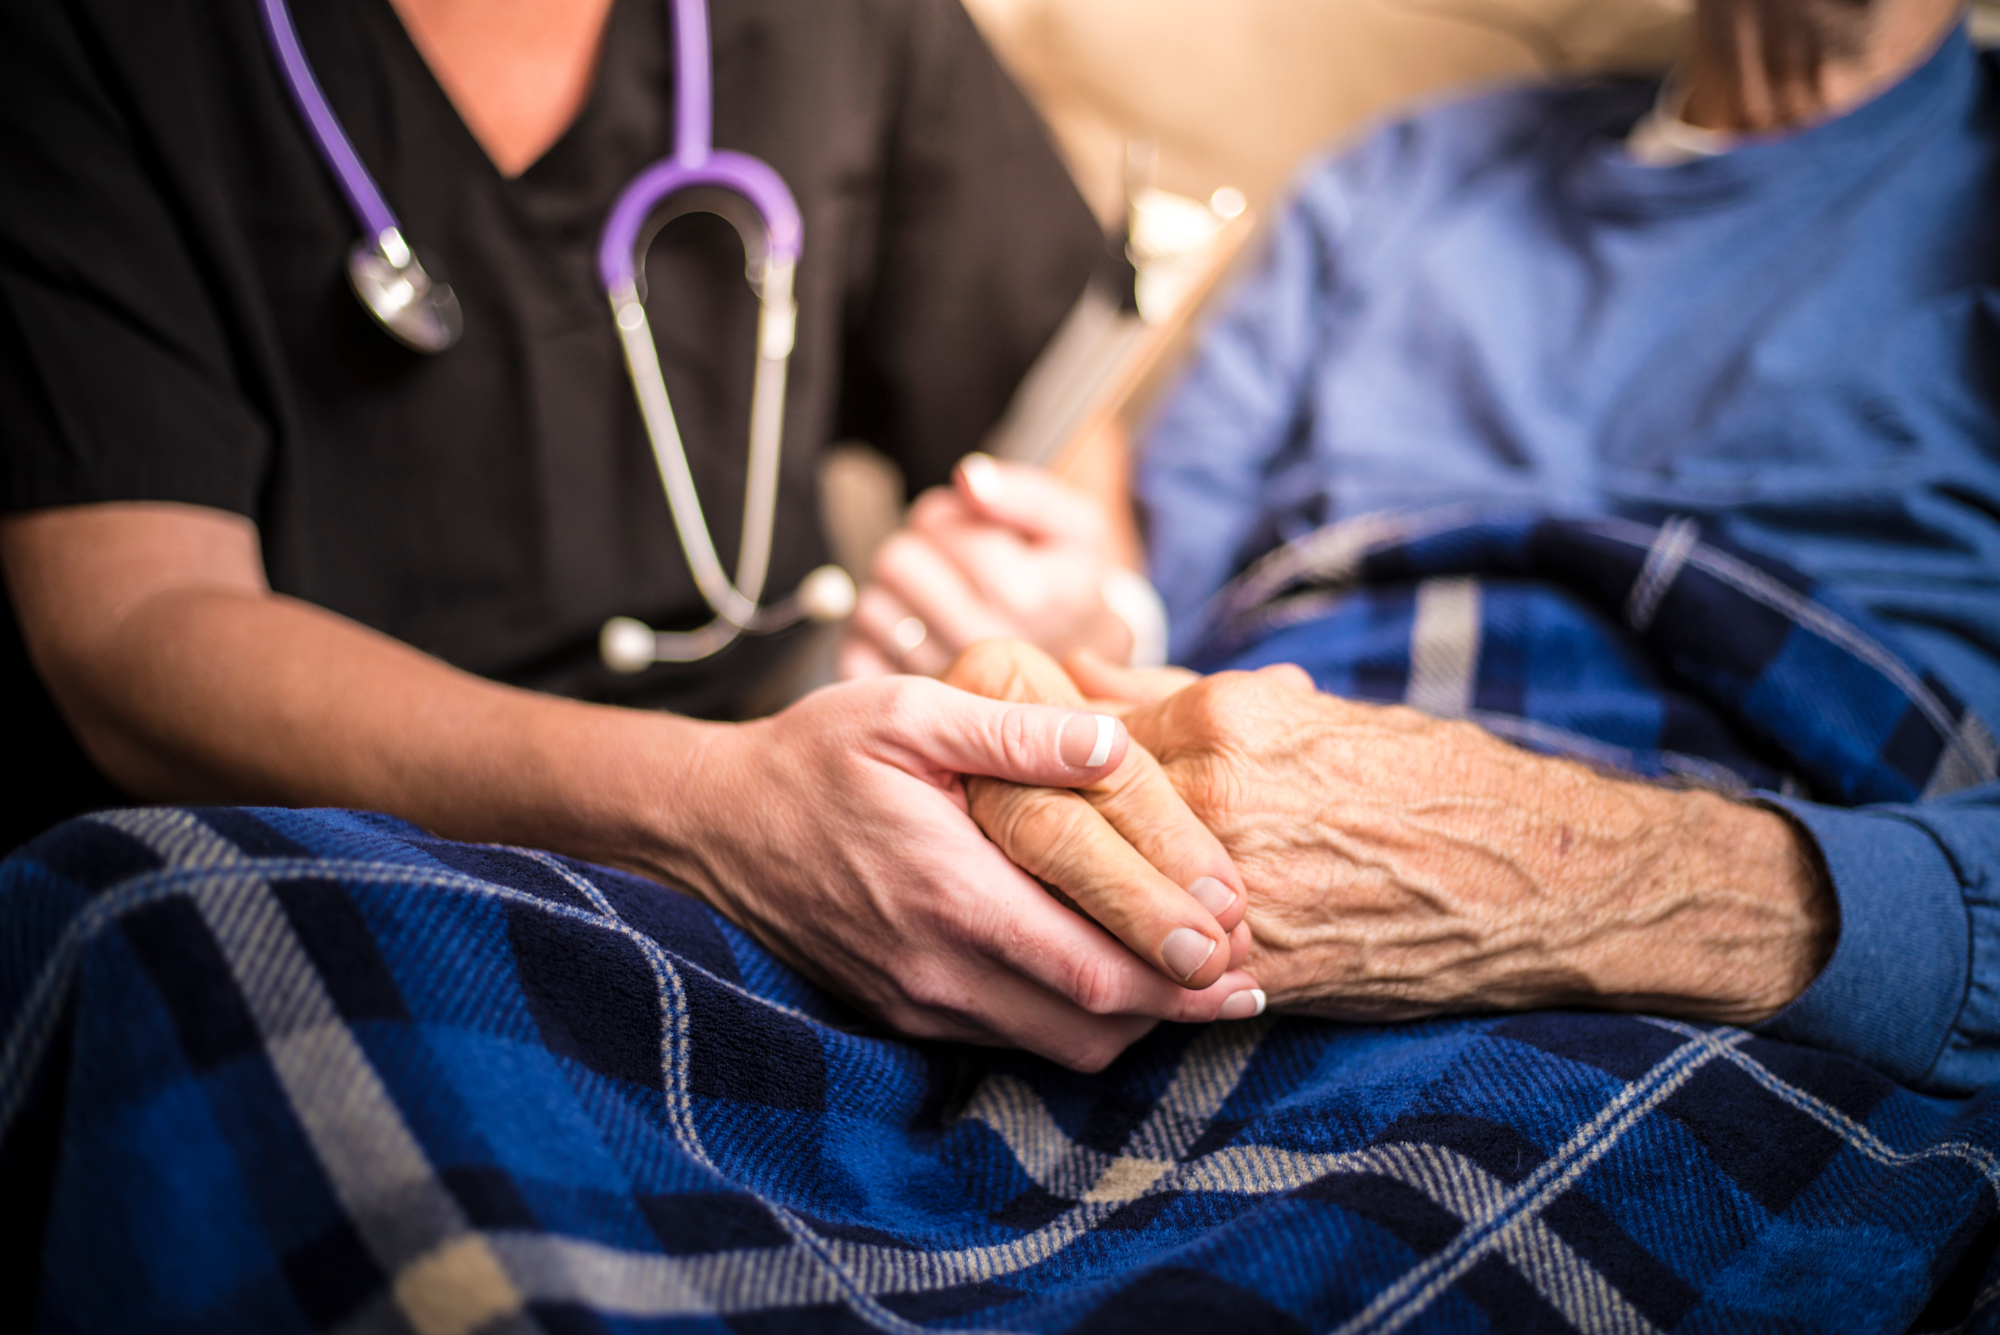 A palliative care nurse holds the hands of one of her elderly patients.